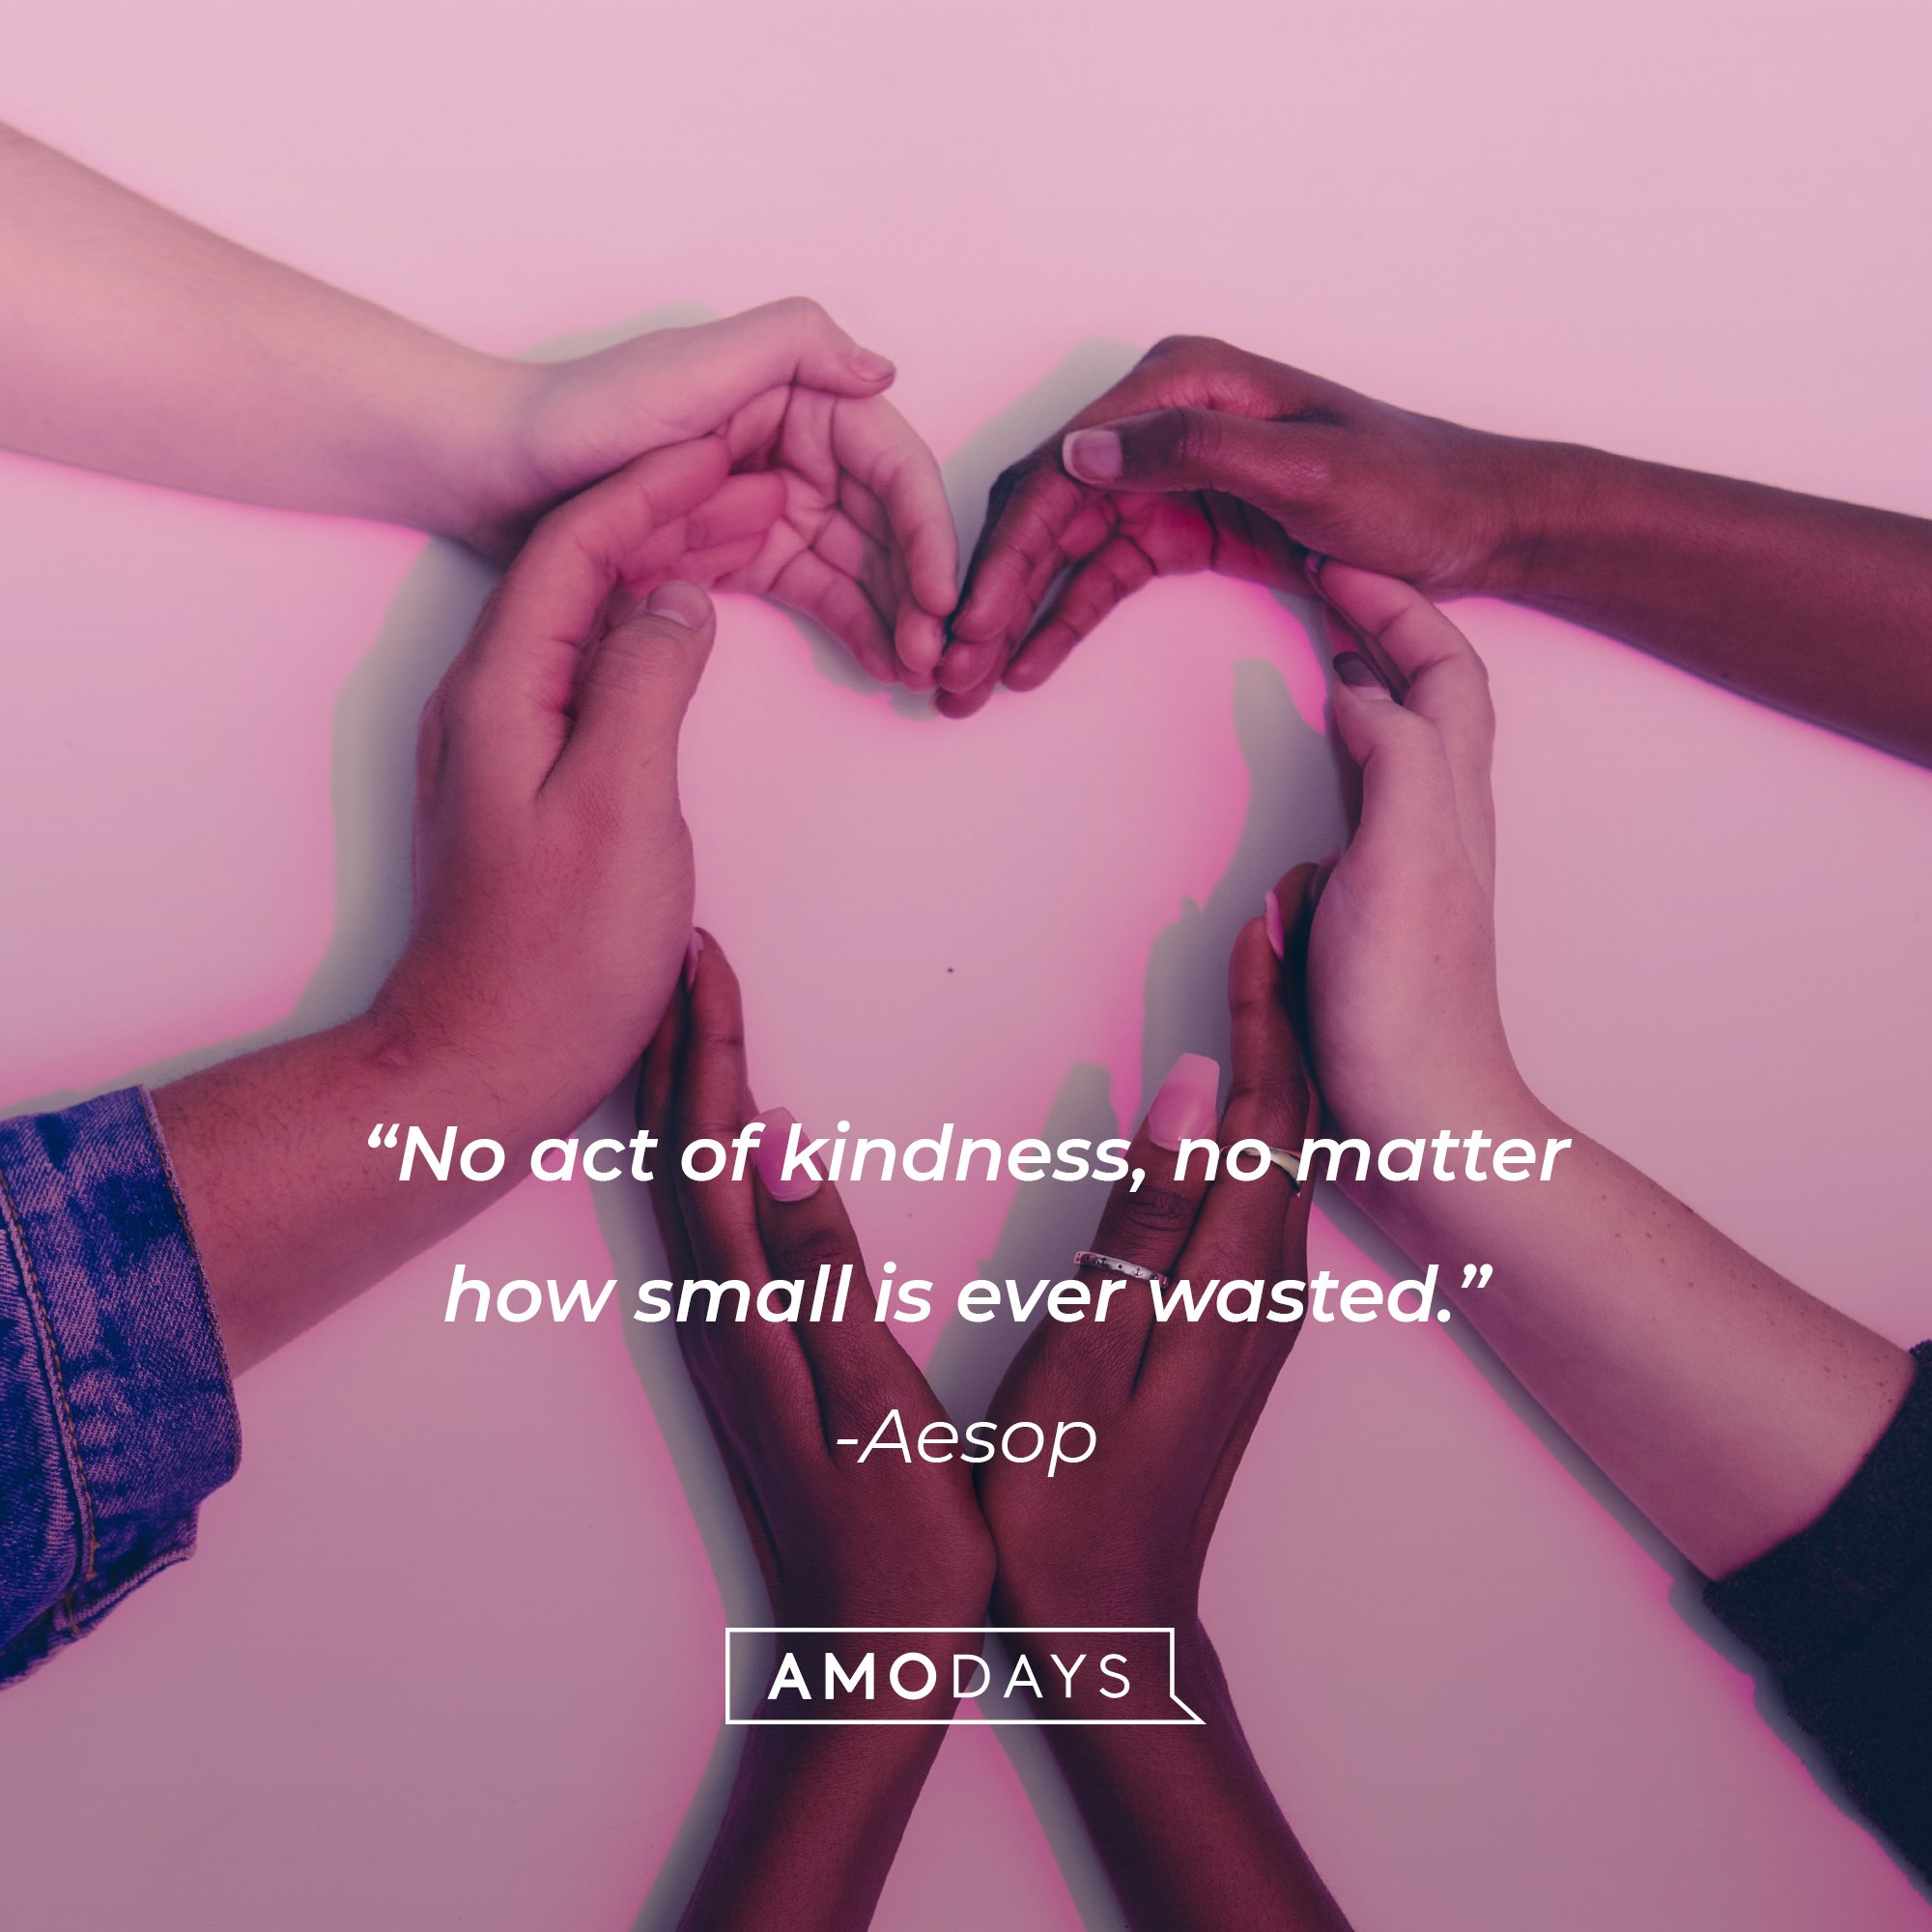 Aesop's quote: "No act of kindness, no matter how small is ever wasted." | Image: AmoDays